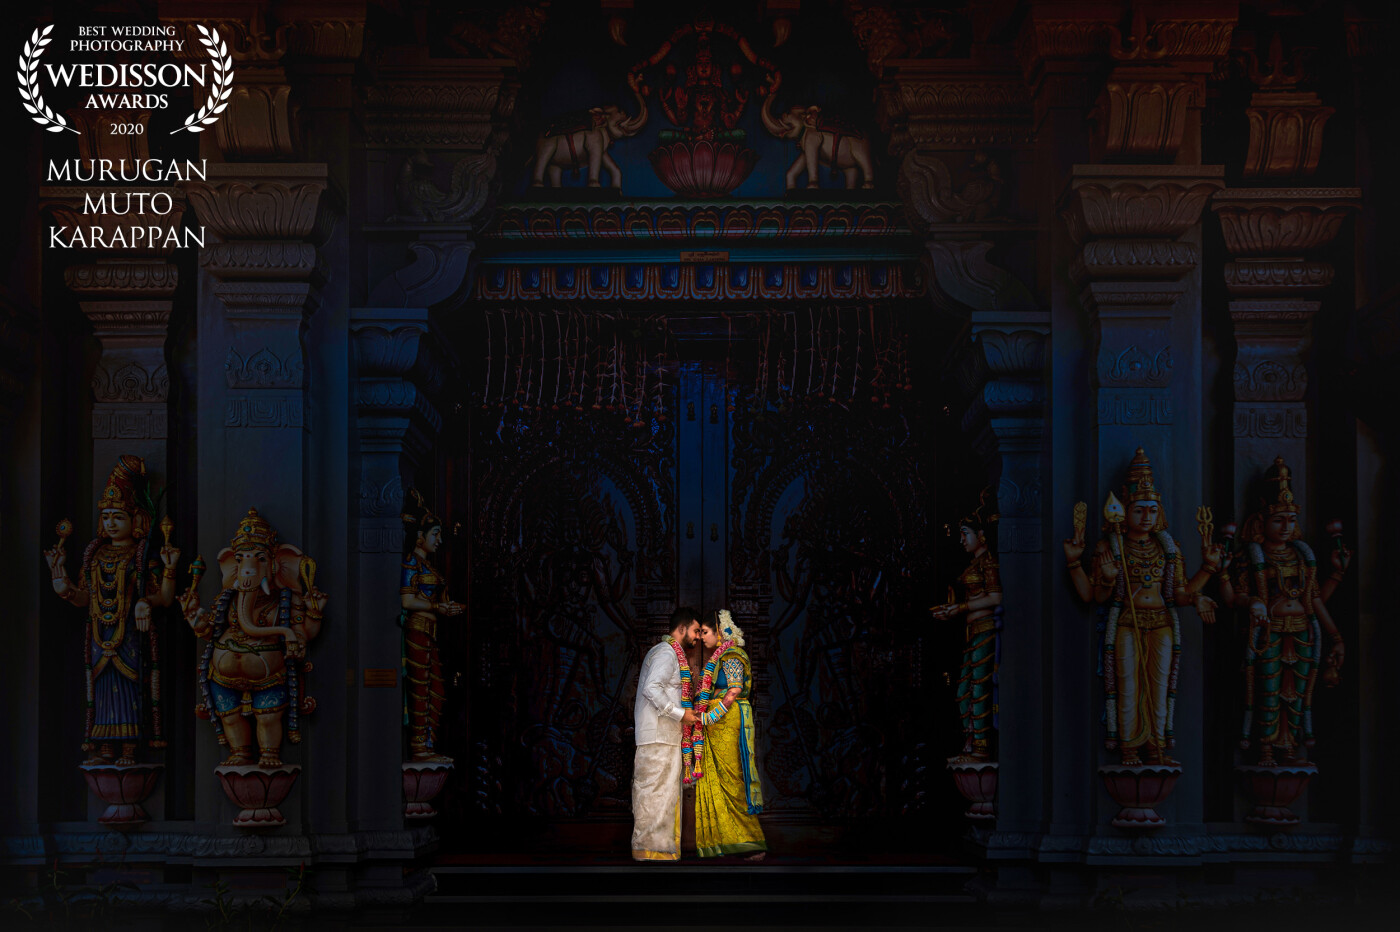 Sugadev & Jai Arathi, A beautiful temple wedding in Singapore, This image was captured at the temple entrance just before they leave.